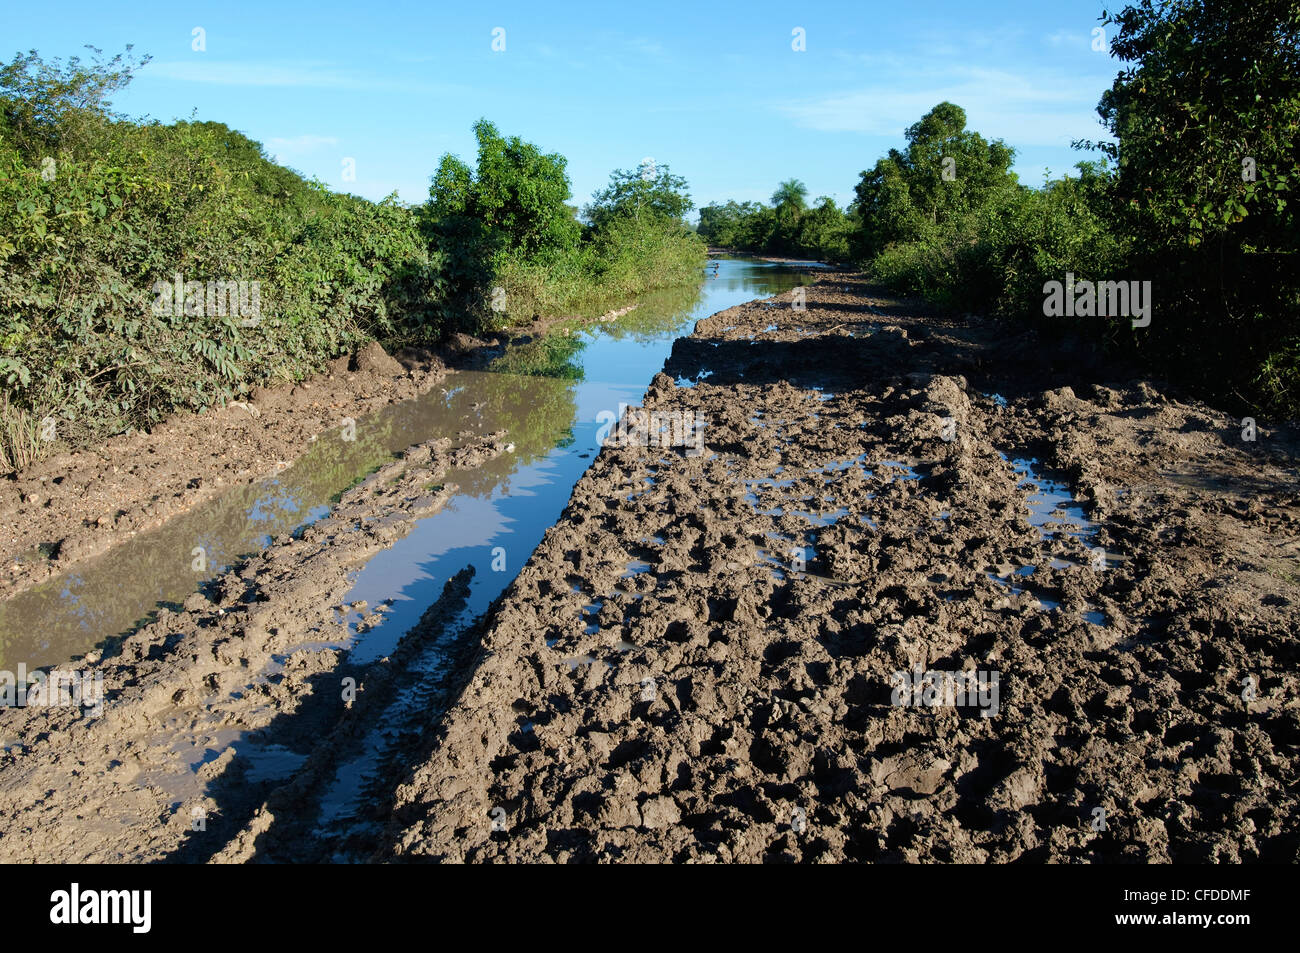 Flooded section of the Trans-Pantanal Highway, Pantanal wetlands, Southwestern Brazil, South America Stock Photo